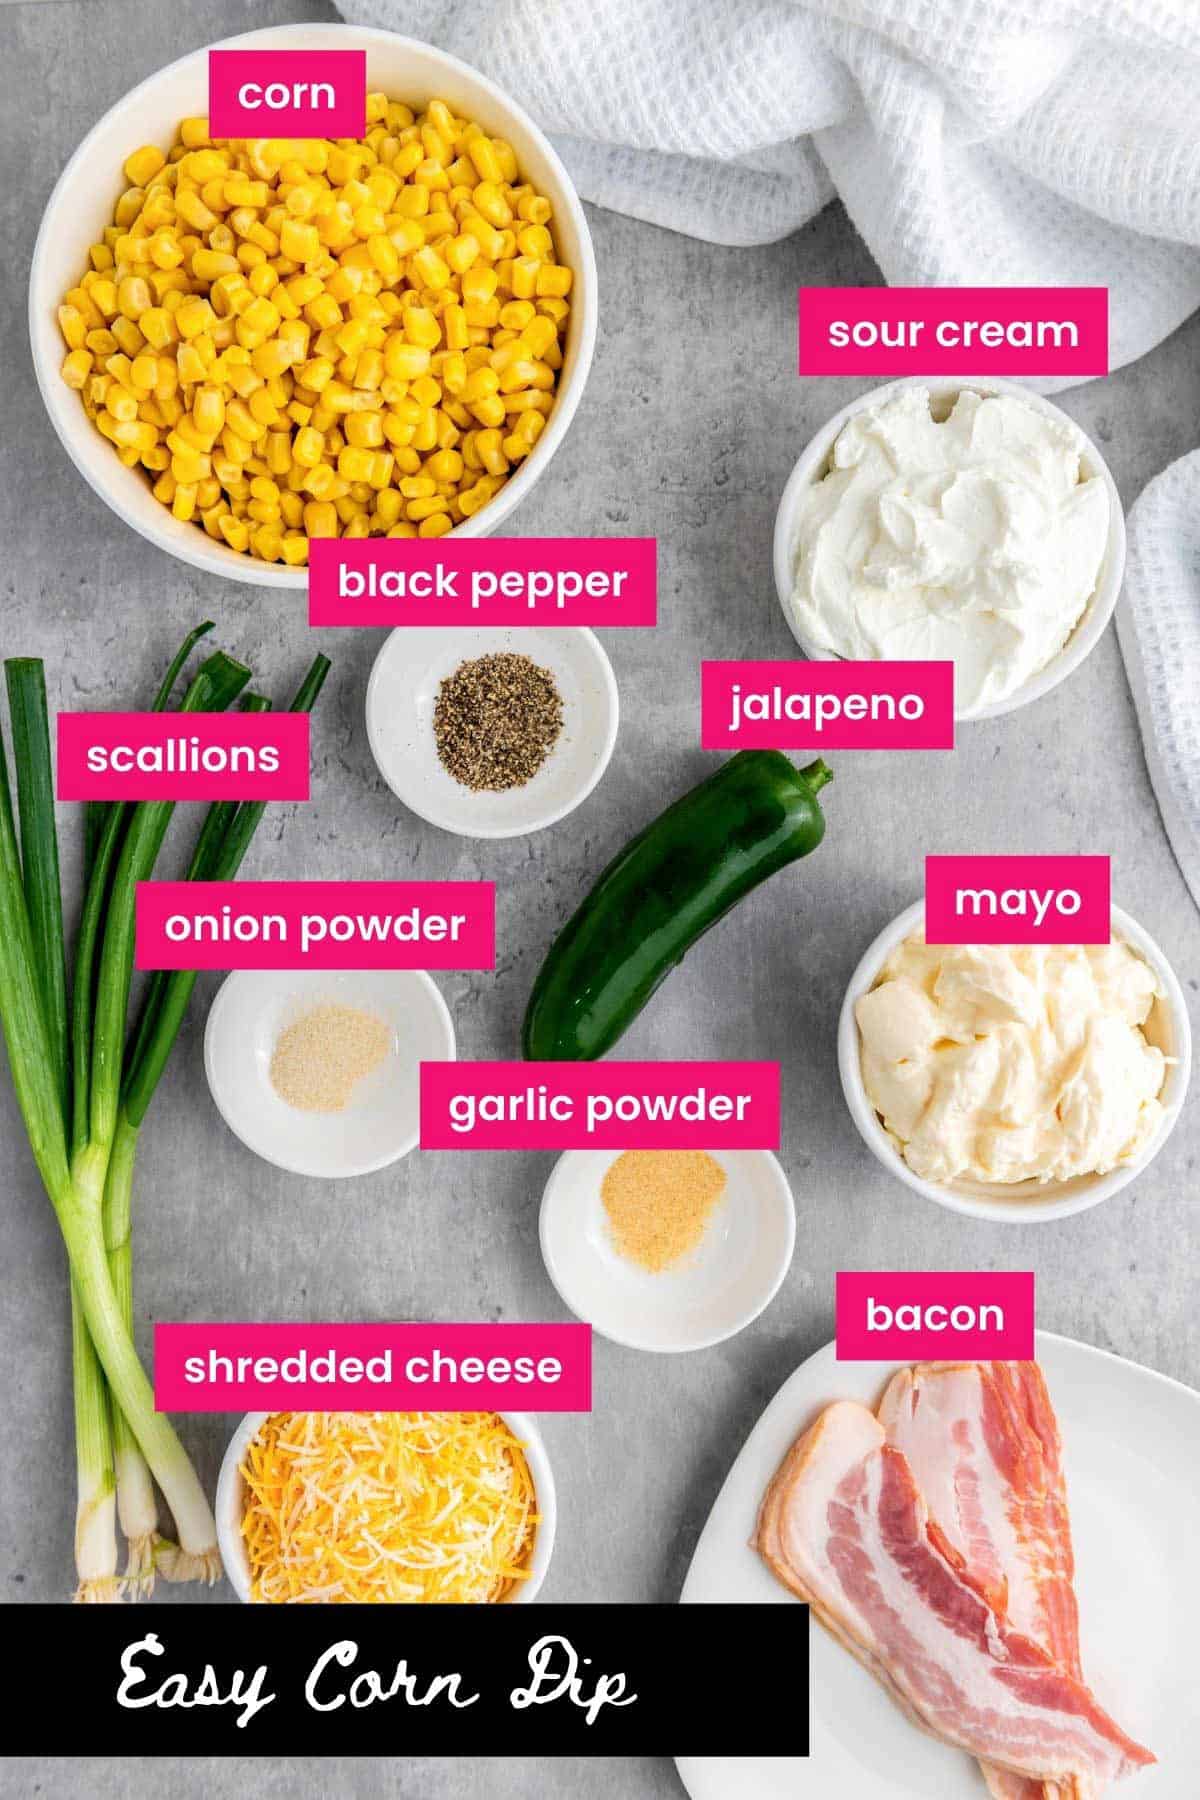 ingredients for corn dip with sour cream